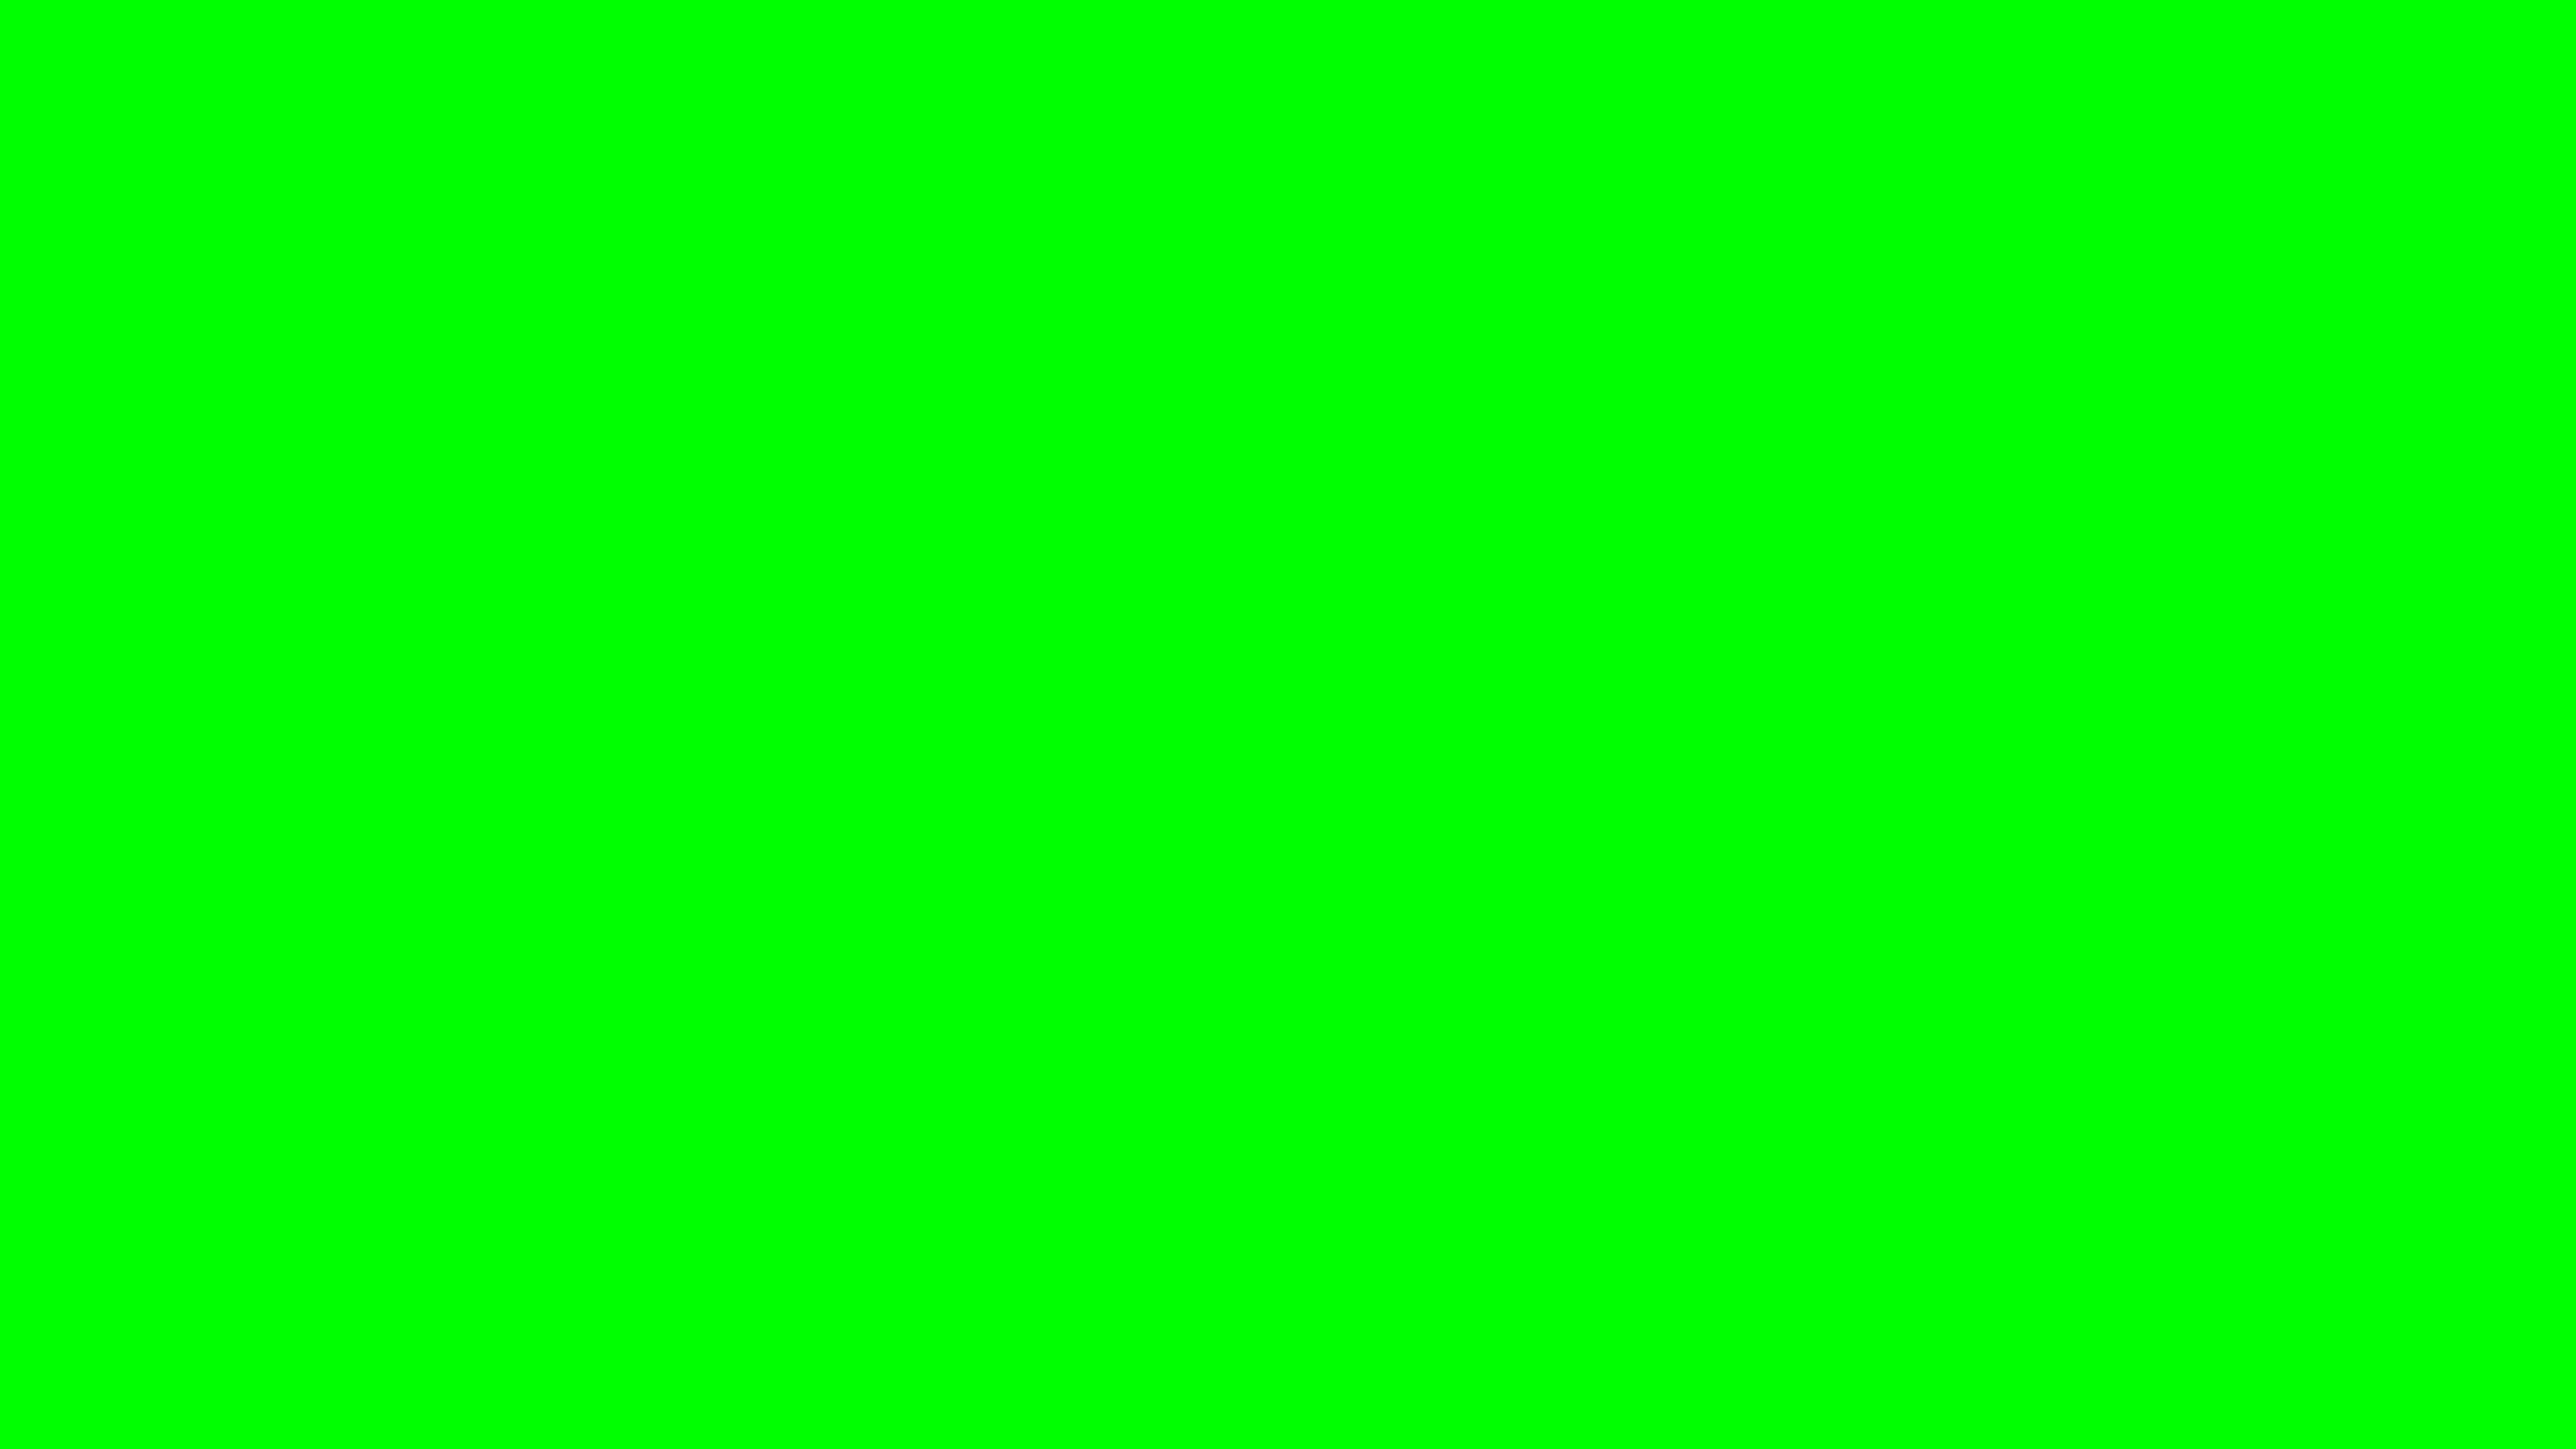 3840x2160 Green X11 Gui Green Solid Color Background